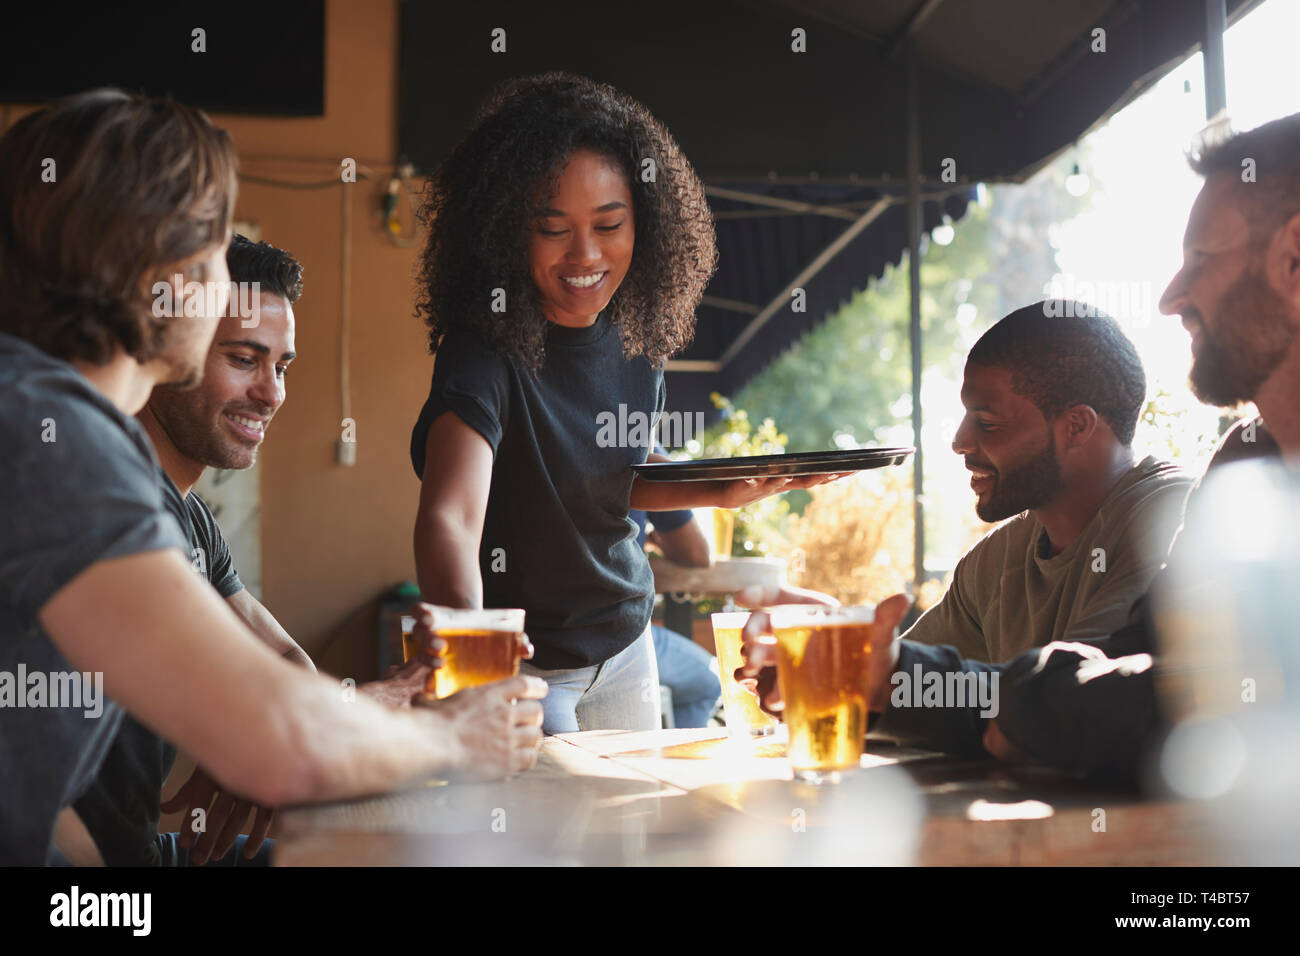 Waitress Serving Drinks To Group Of Male Friends Meeting In Sports Bar Stock Photo